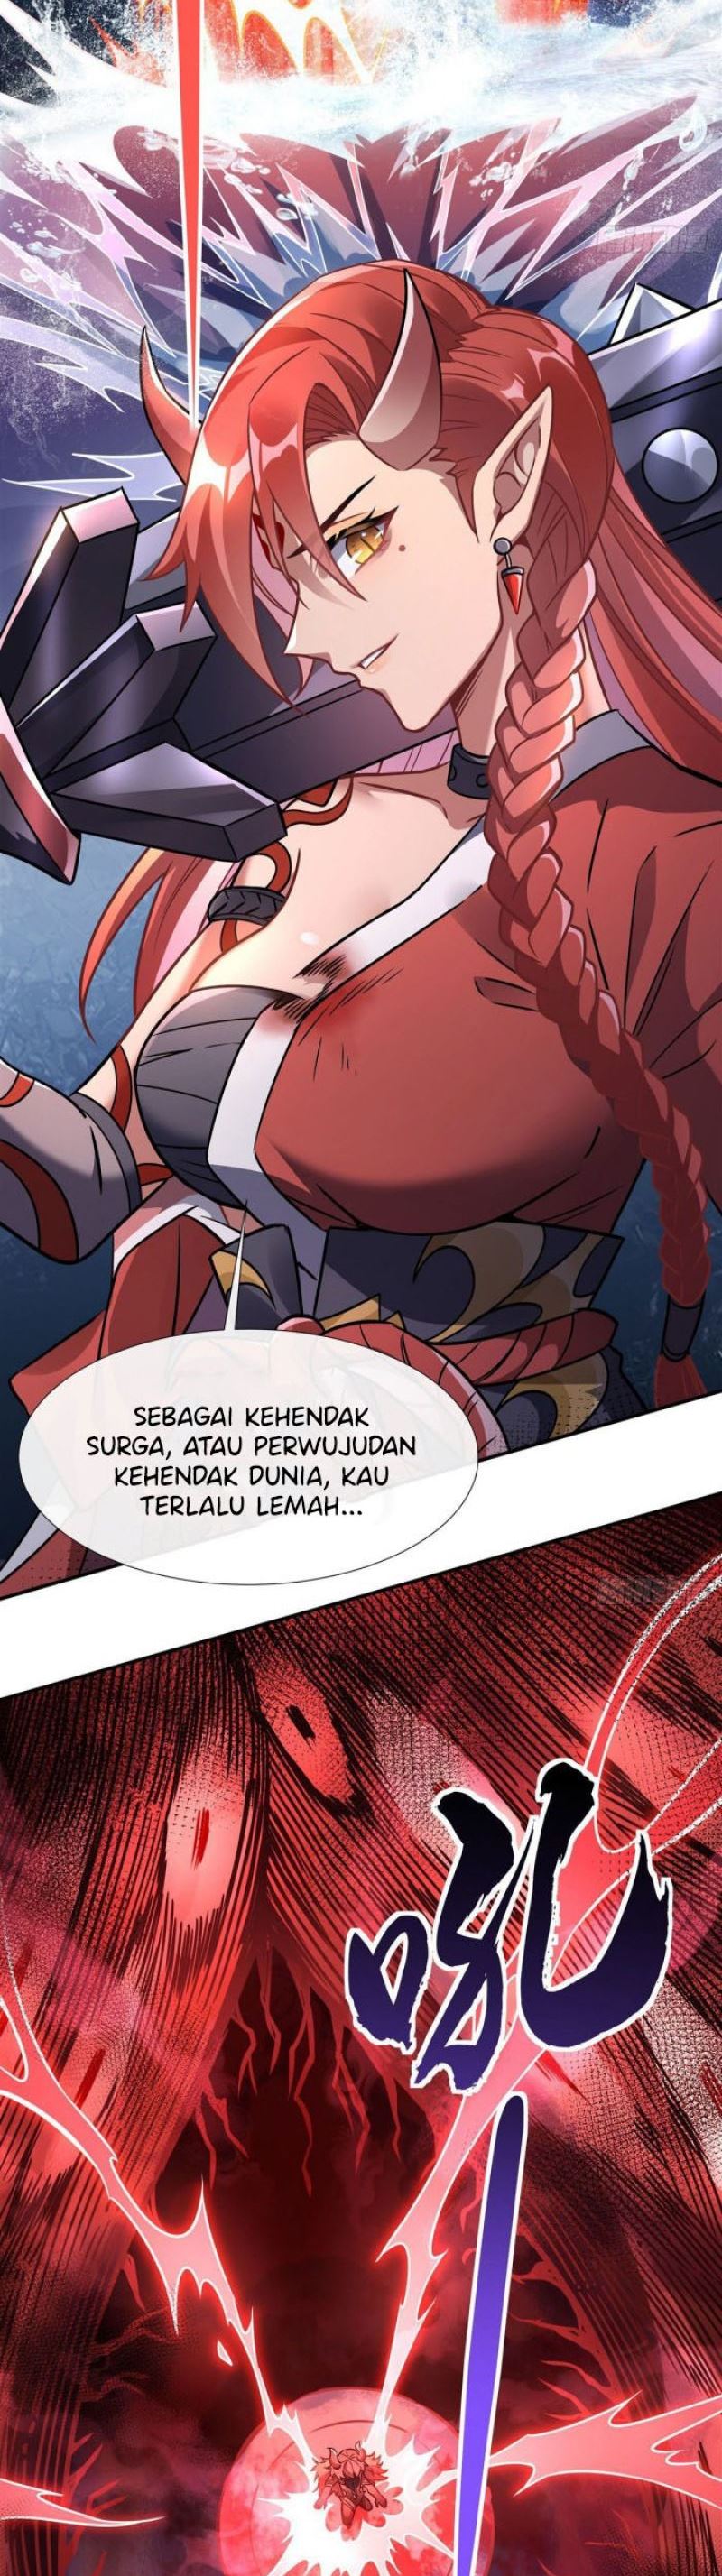 Dilarang COPAS - situs resmi www.mangacanblog.com - Komik my female apprentices are all big shots from the future 115 - chapter 115 116 Indonesia my female apprentices are all big shots from the future 115 - chapter 115 Terbaru 12|Baca Manga Komik Indonesia|Mangacan